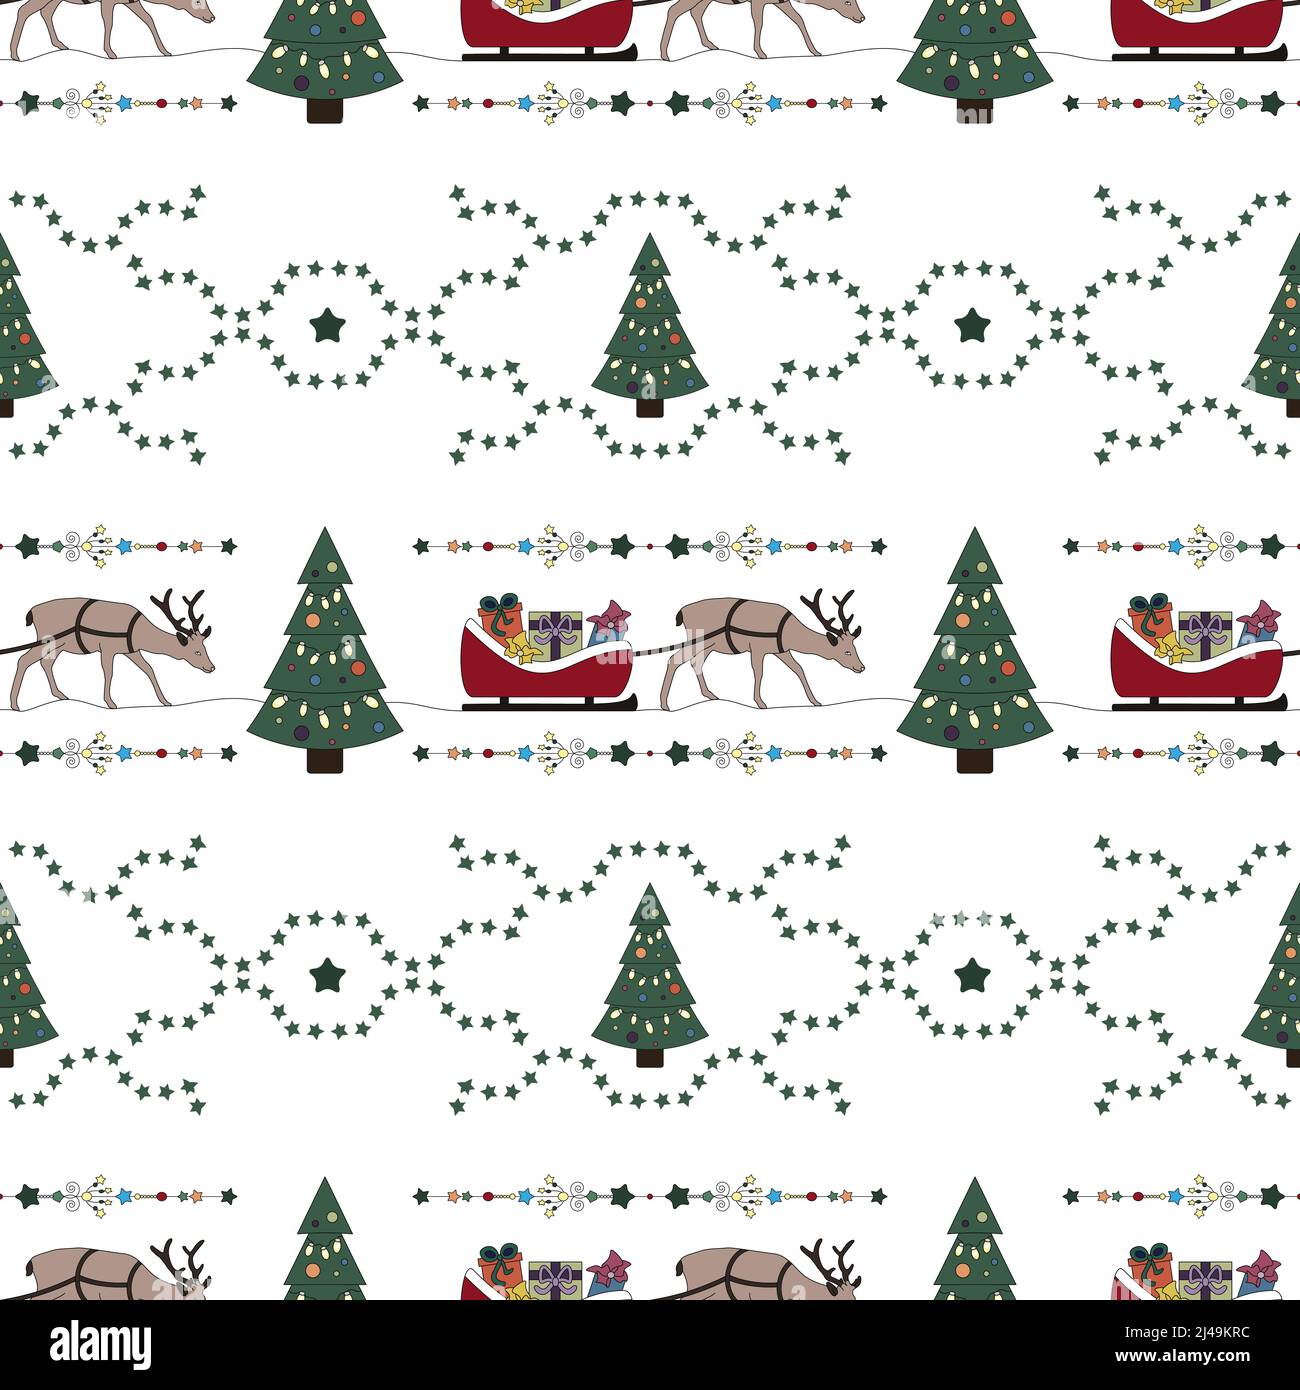 Christmas seamless pattern. Reindeer and his sleigh filled with gifts. Christmas tree. Transparent background. Vector illustration. Stock Vector